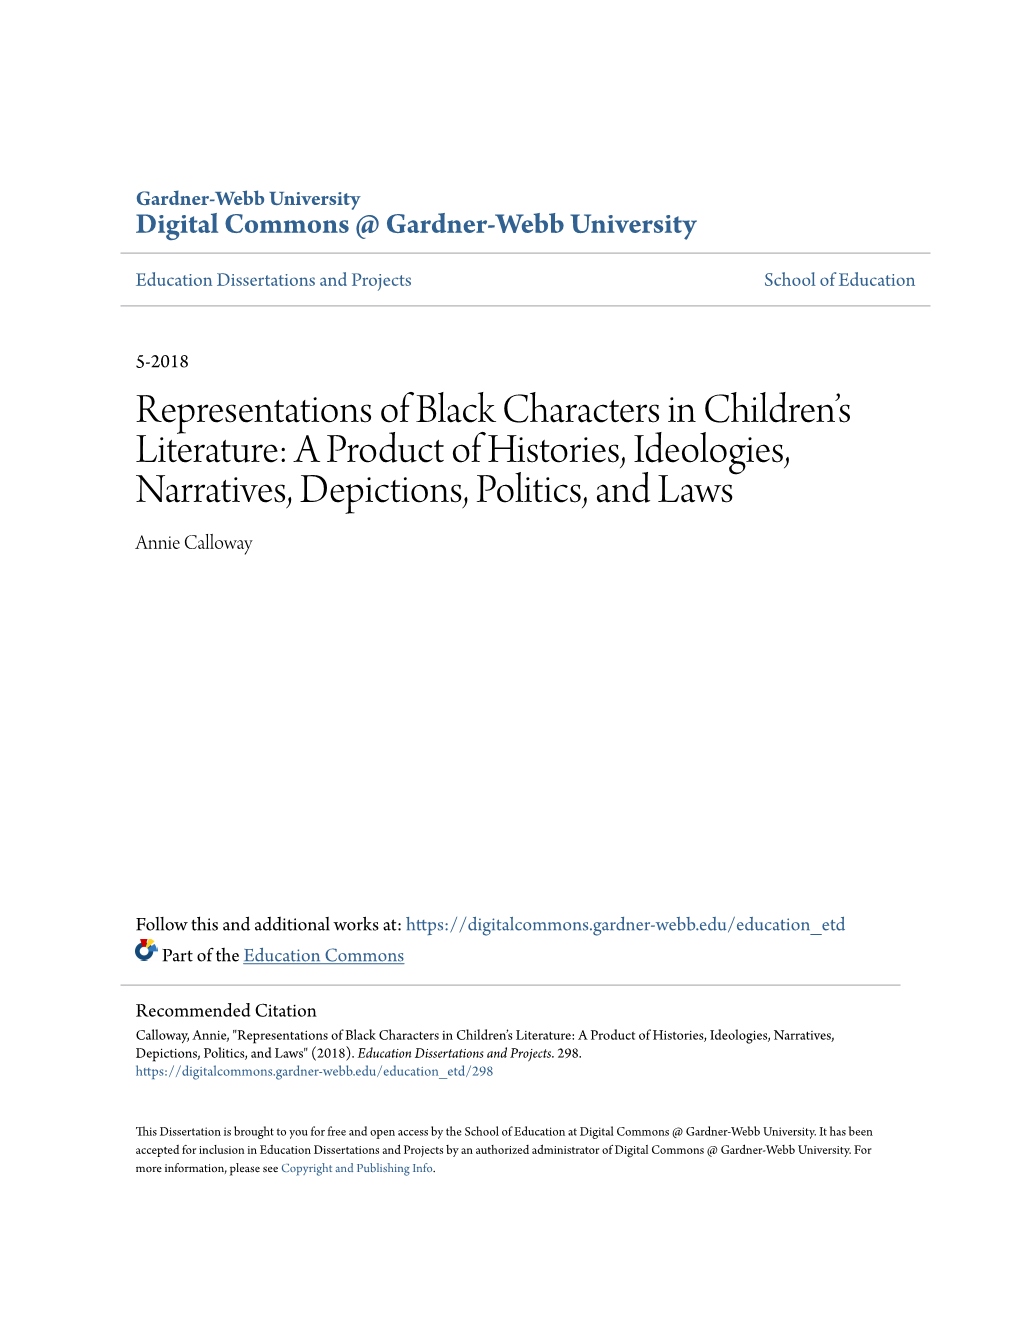 Representations of Black Characters in Children's Literature: a Product Of